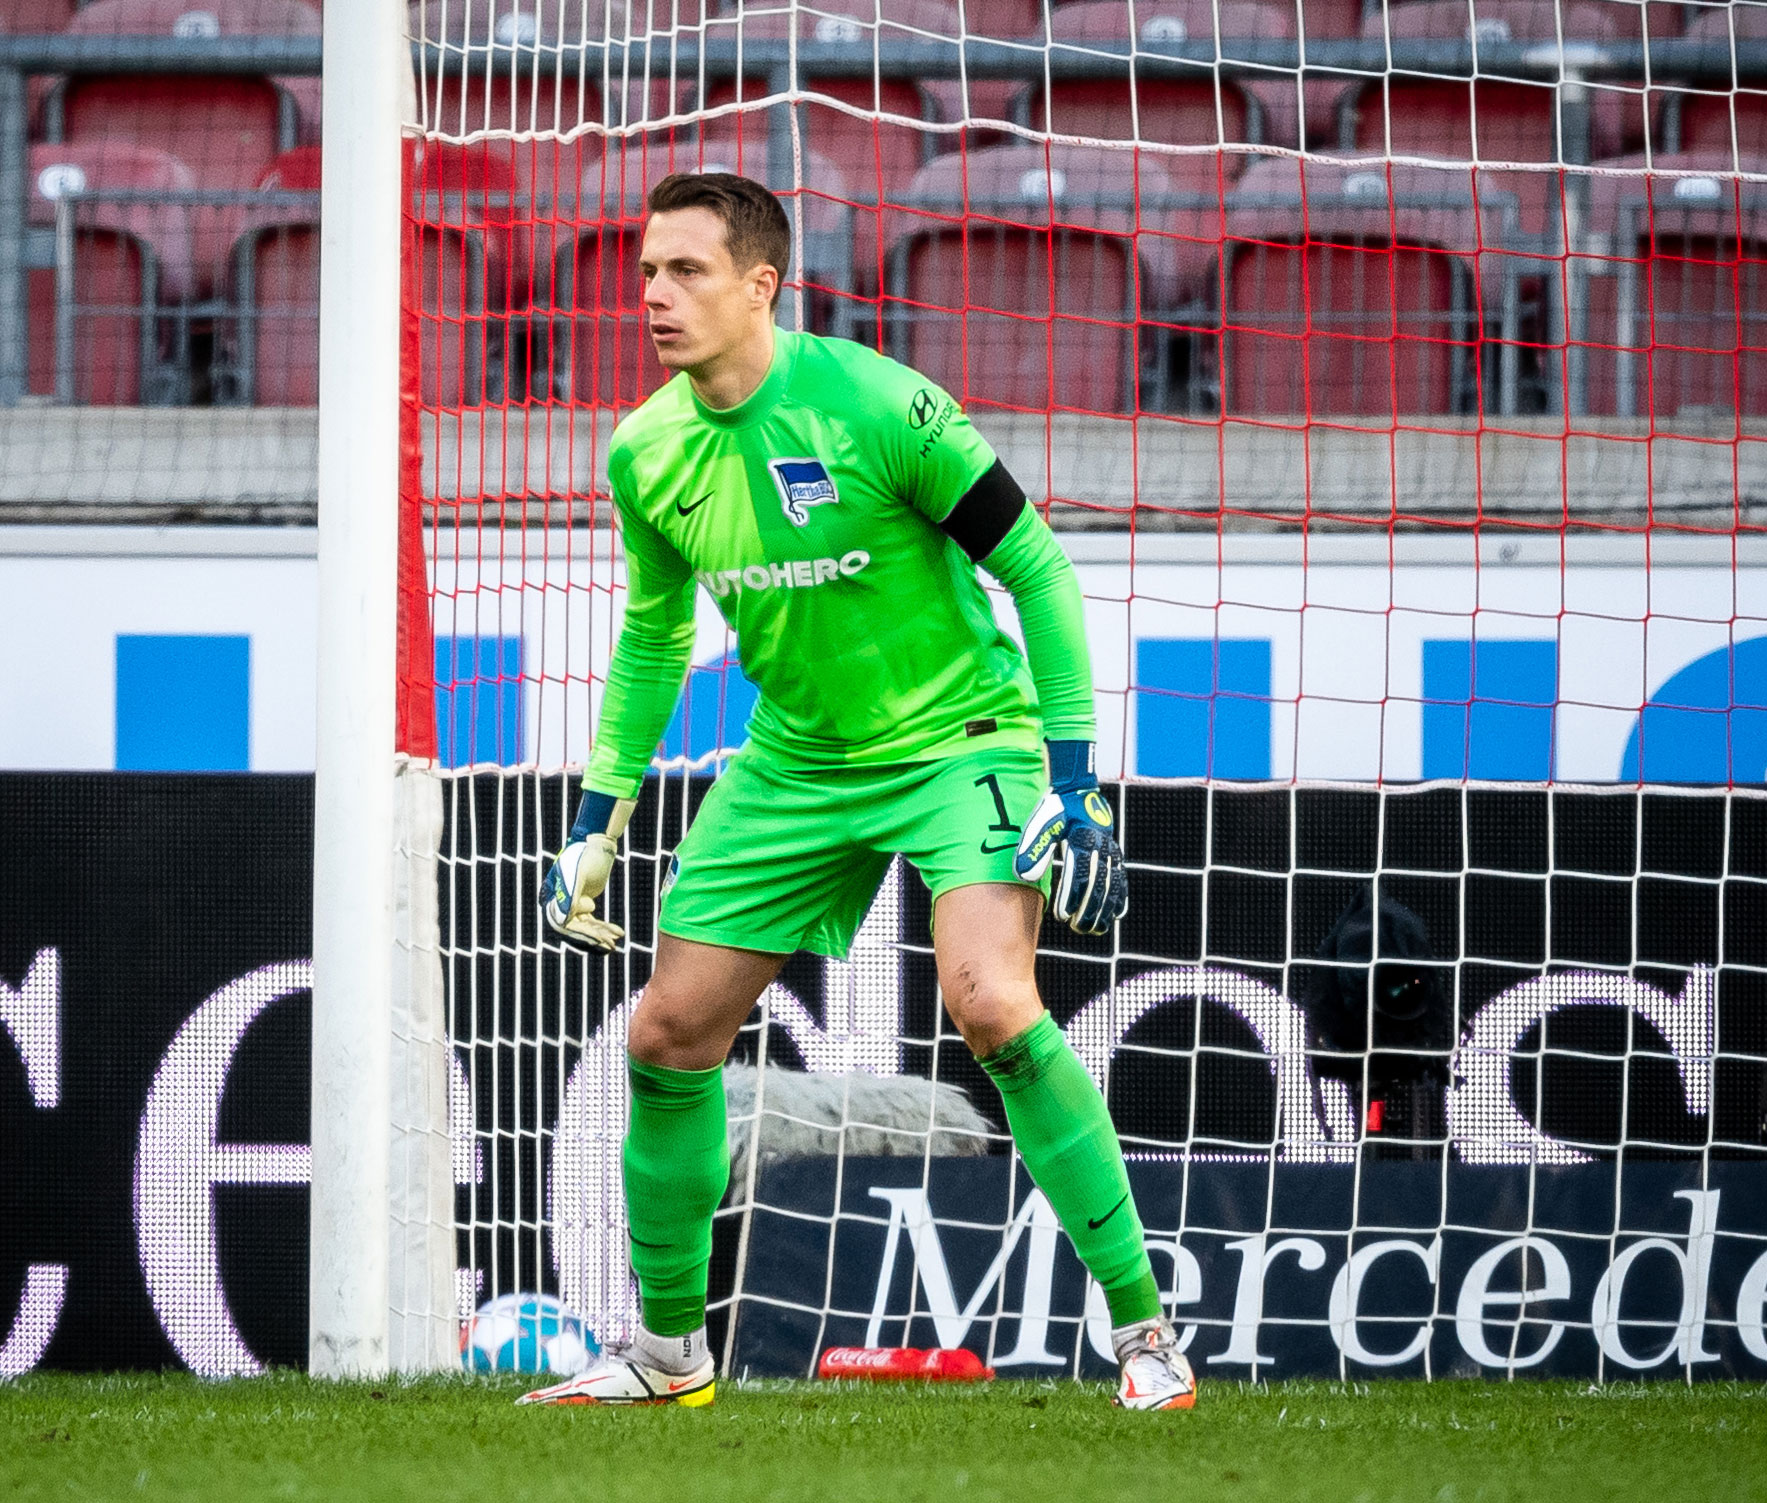 Freiburg consider bringing back either Müller or Schwolow as back up keeper